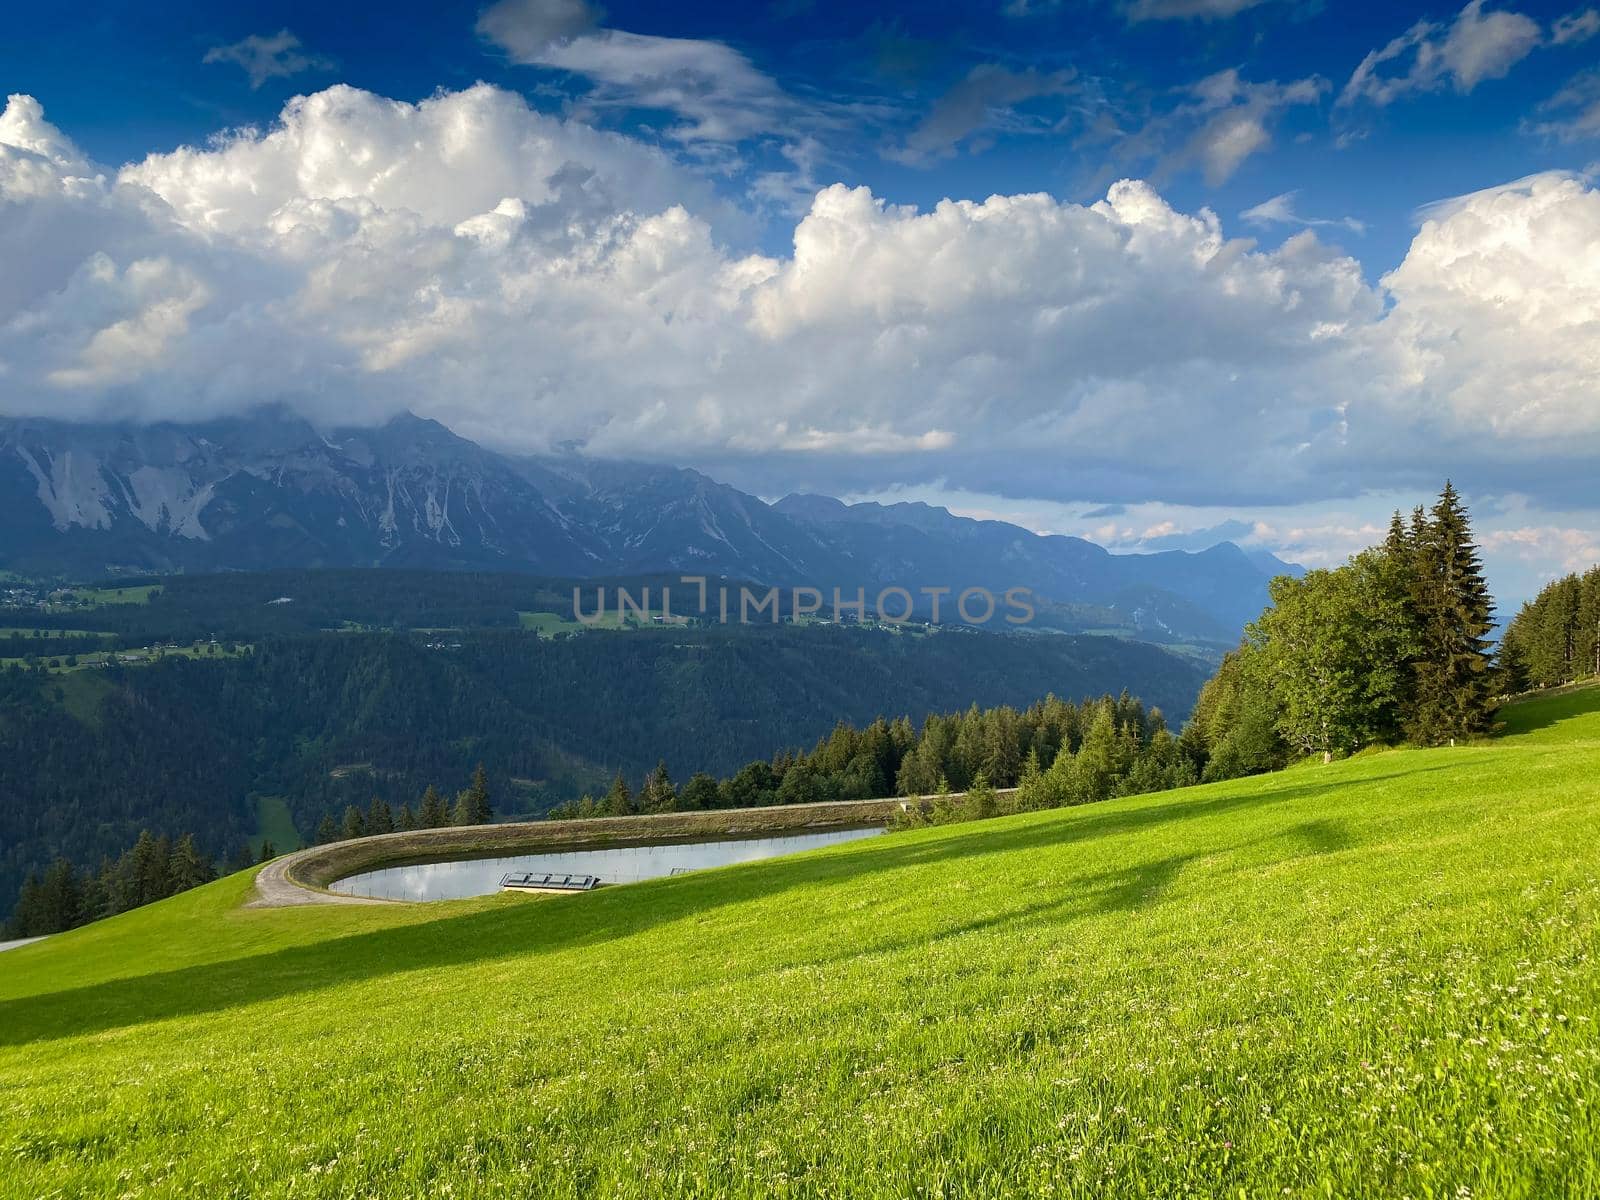 Dachstein mountain and summer valley views from Rohrmoos-Untertal, Austria. Rohrmoos-Untertal is a rural district known as a winter sports resort.